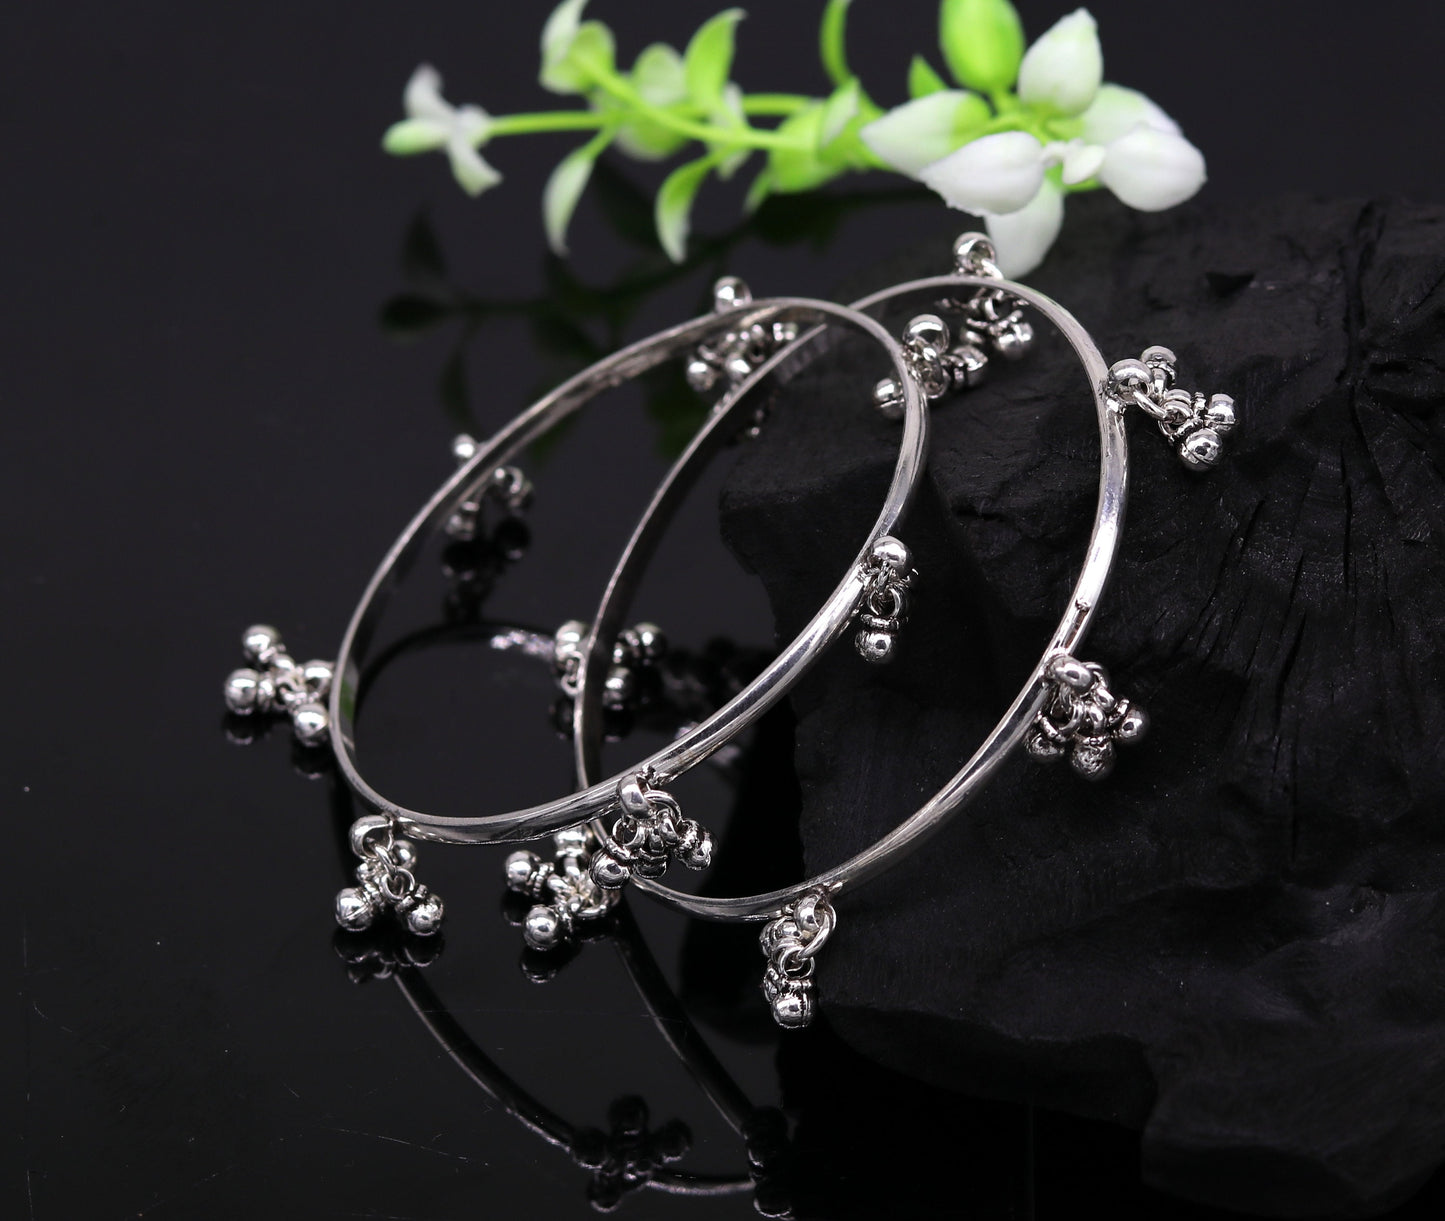 925 sterling silver handmade customized excellent hanging bells bridesmaid bangle bracelet kada , wedding personalized gifting jewelry ba91 - TRIBAL ORNAMENTS